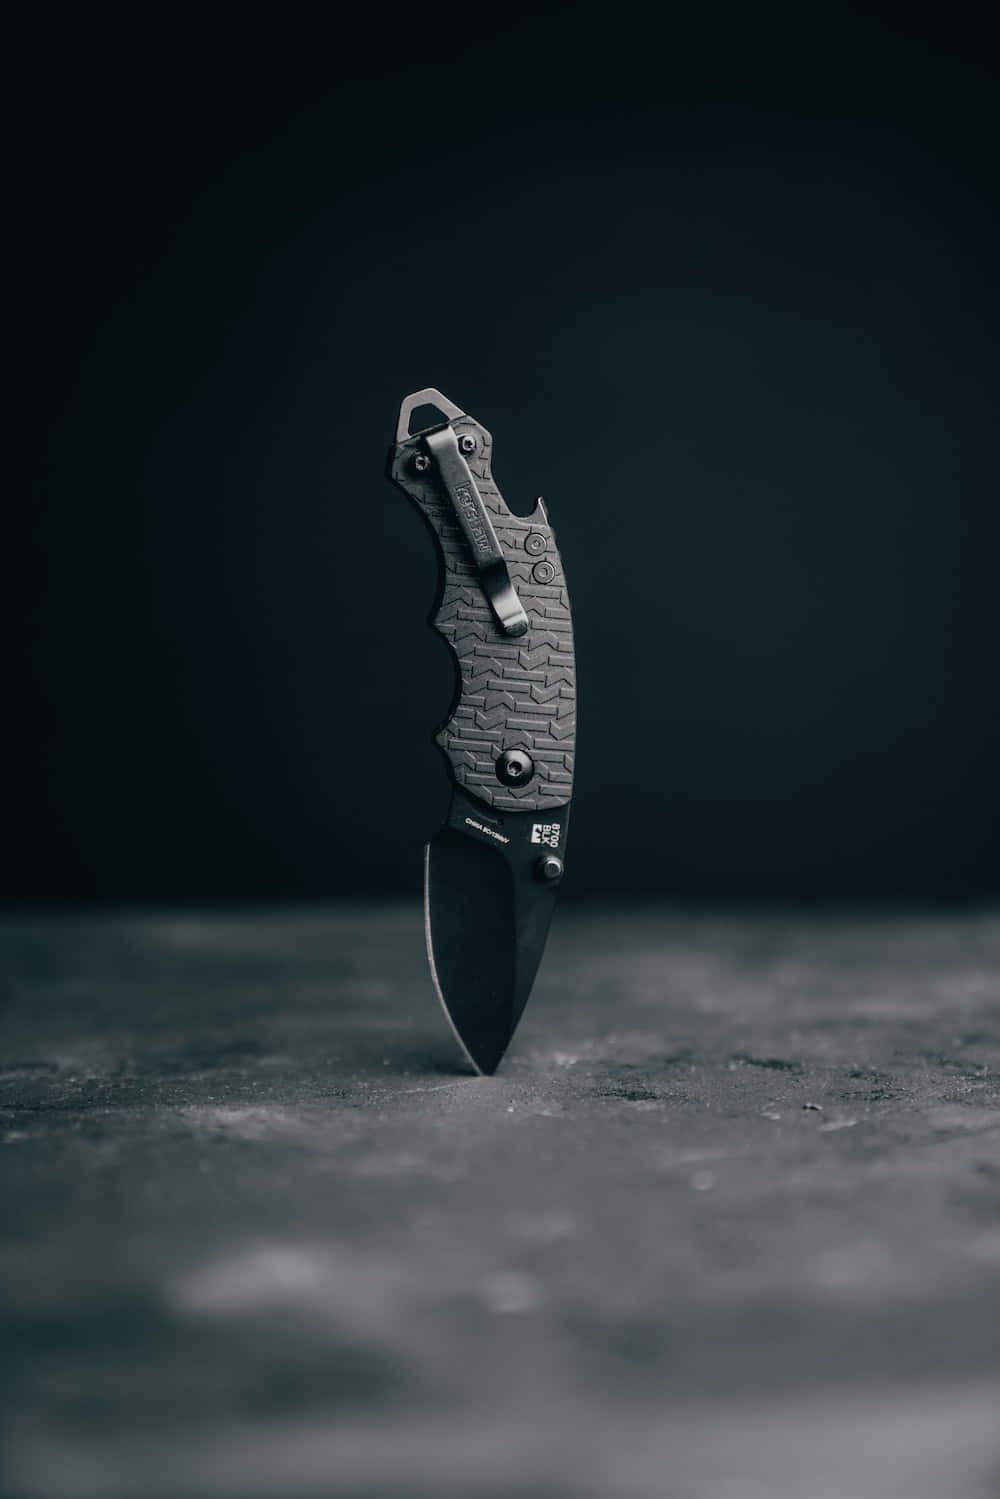 A Knife Is Sitting On A Table With A Black Background